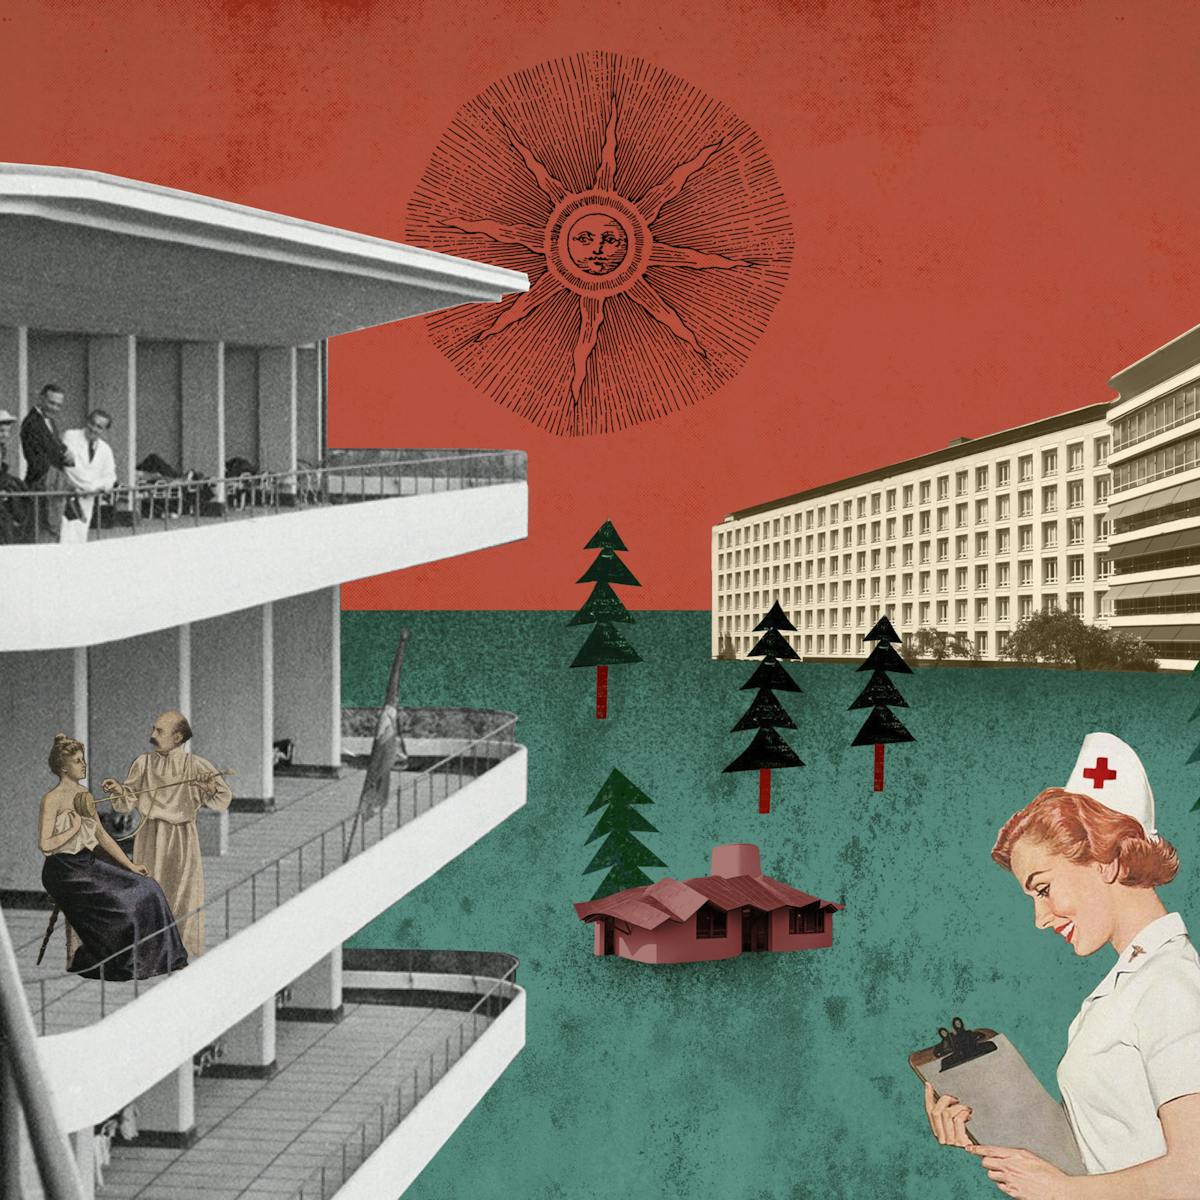 Collage illustration showing the Paimio Sanitorium in Findland, with people sitting on the balconies, enjoying the fresh air and with lots of pine trees around.